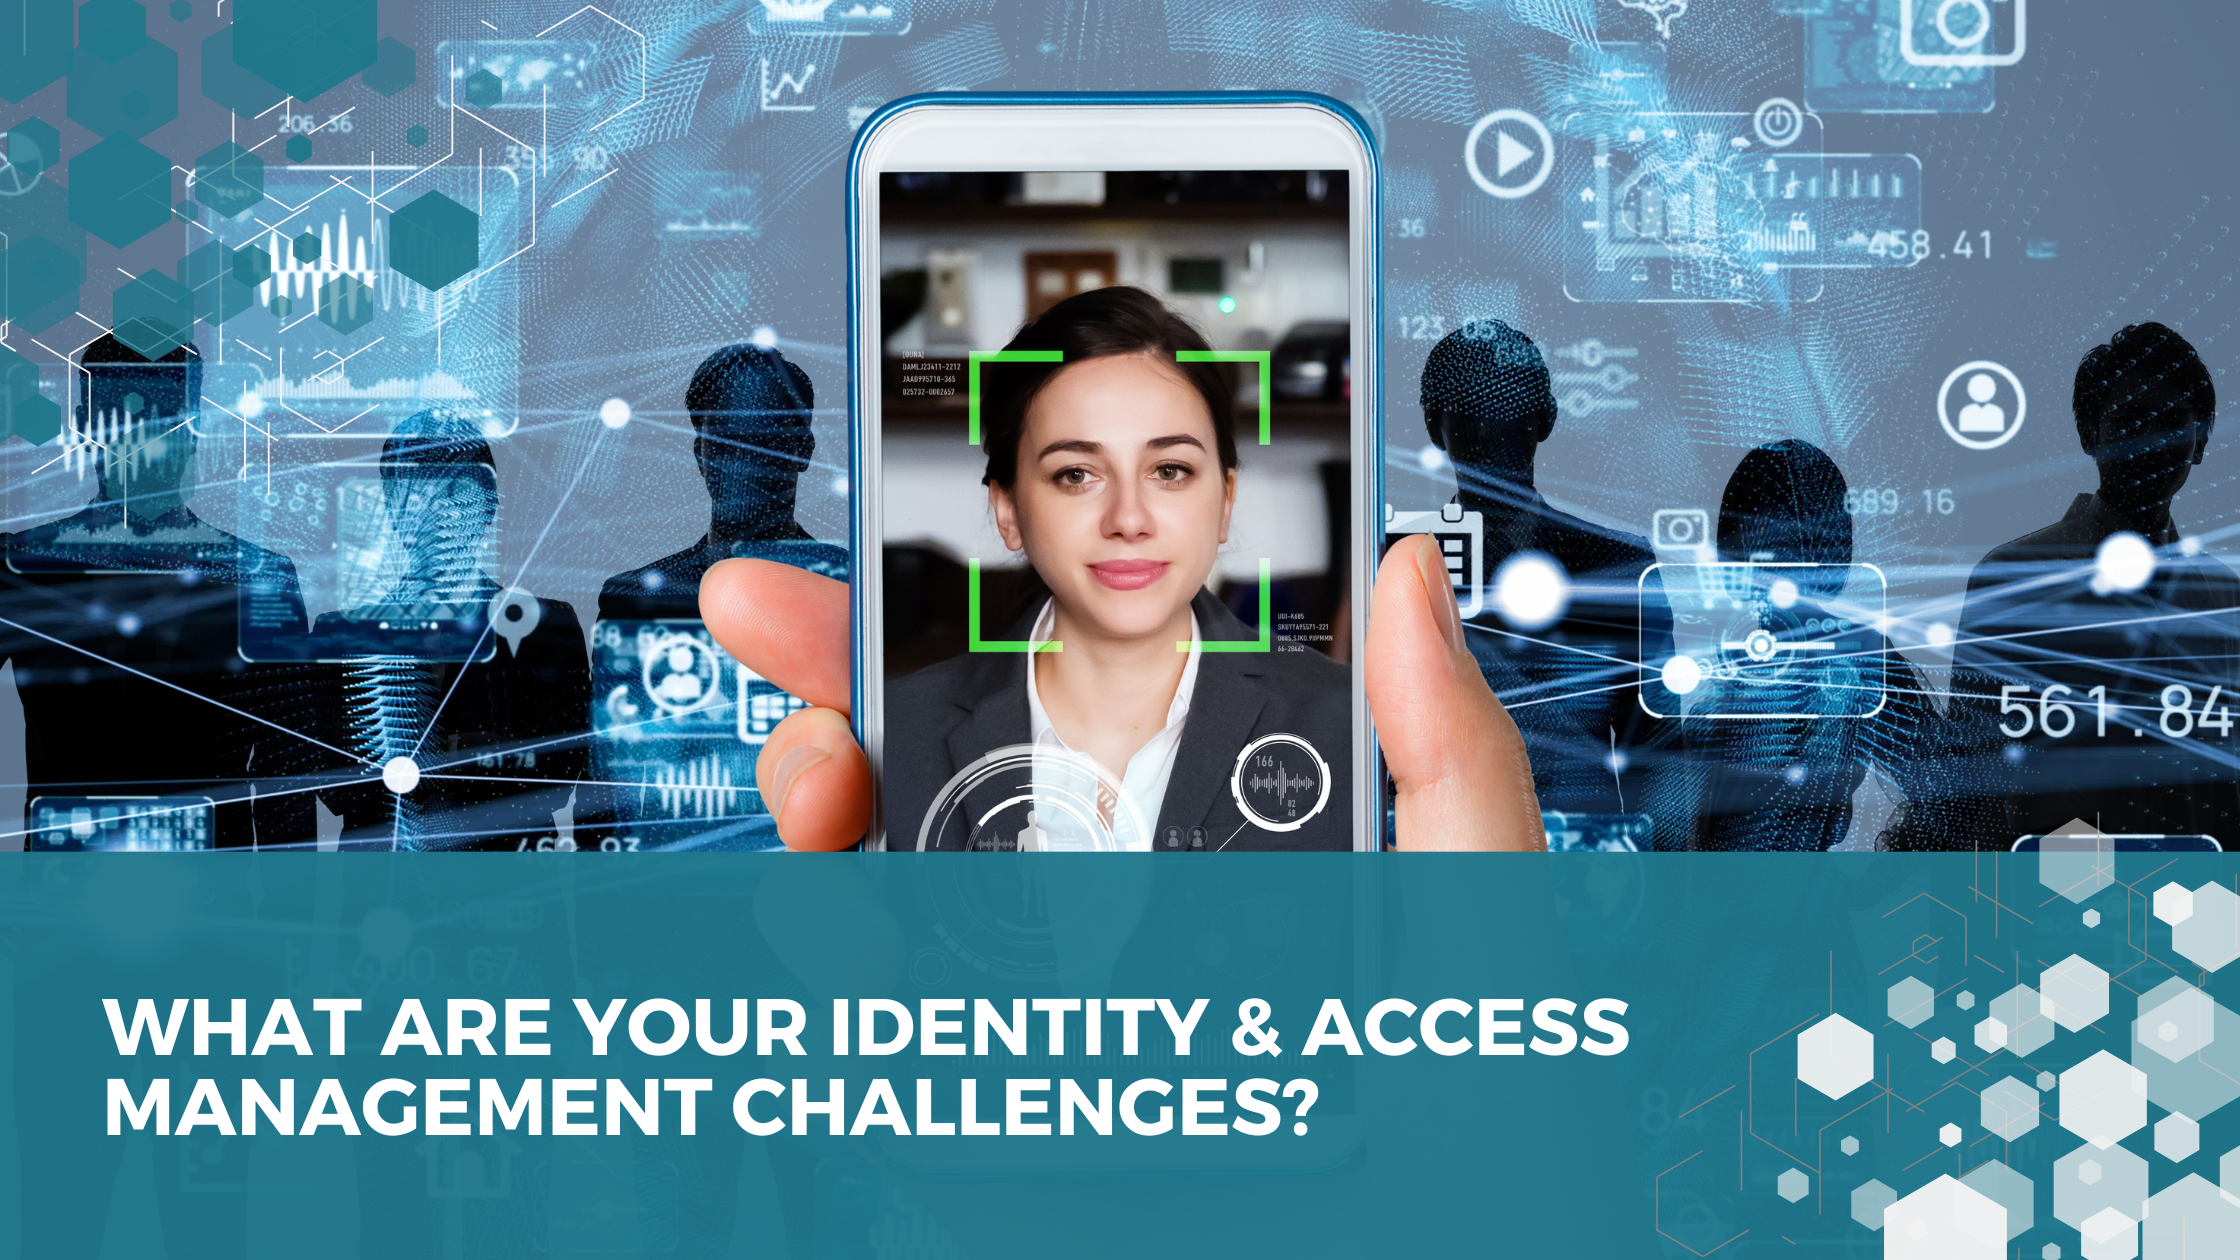 What are your Identity & Access Management Challenges?